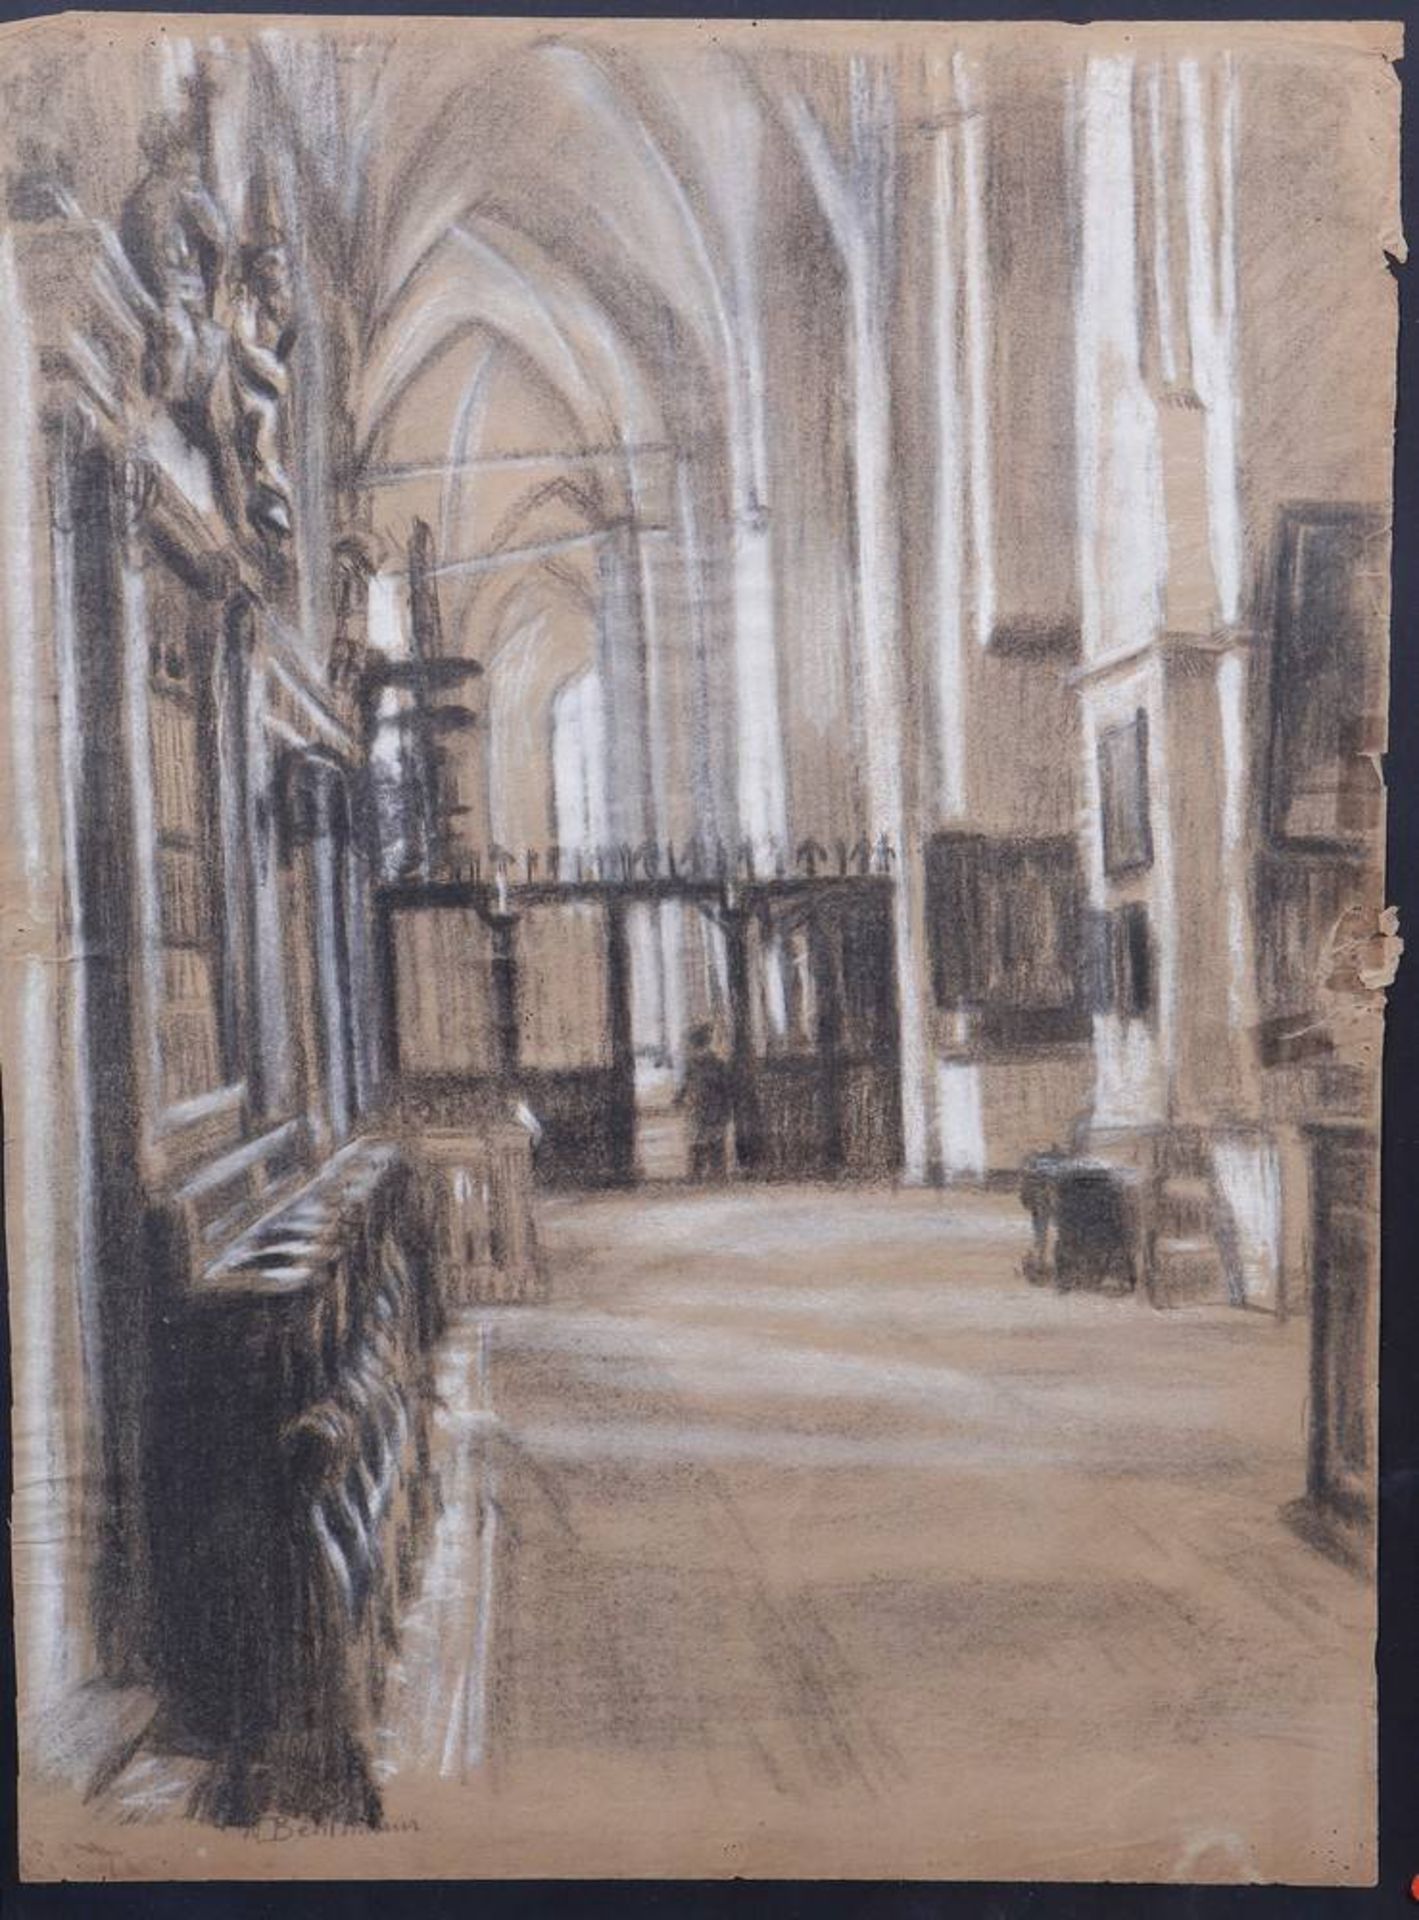 Organ and interior of Lübeck Cathedral before the bombing - Image 2 of 5